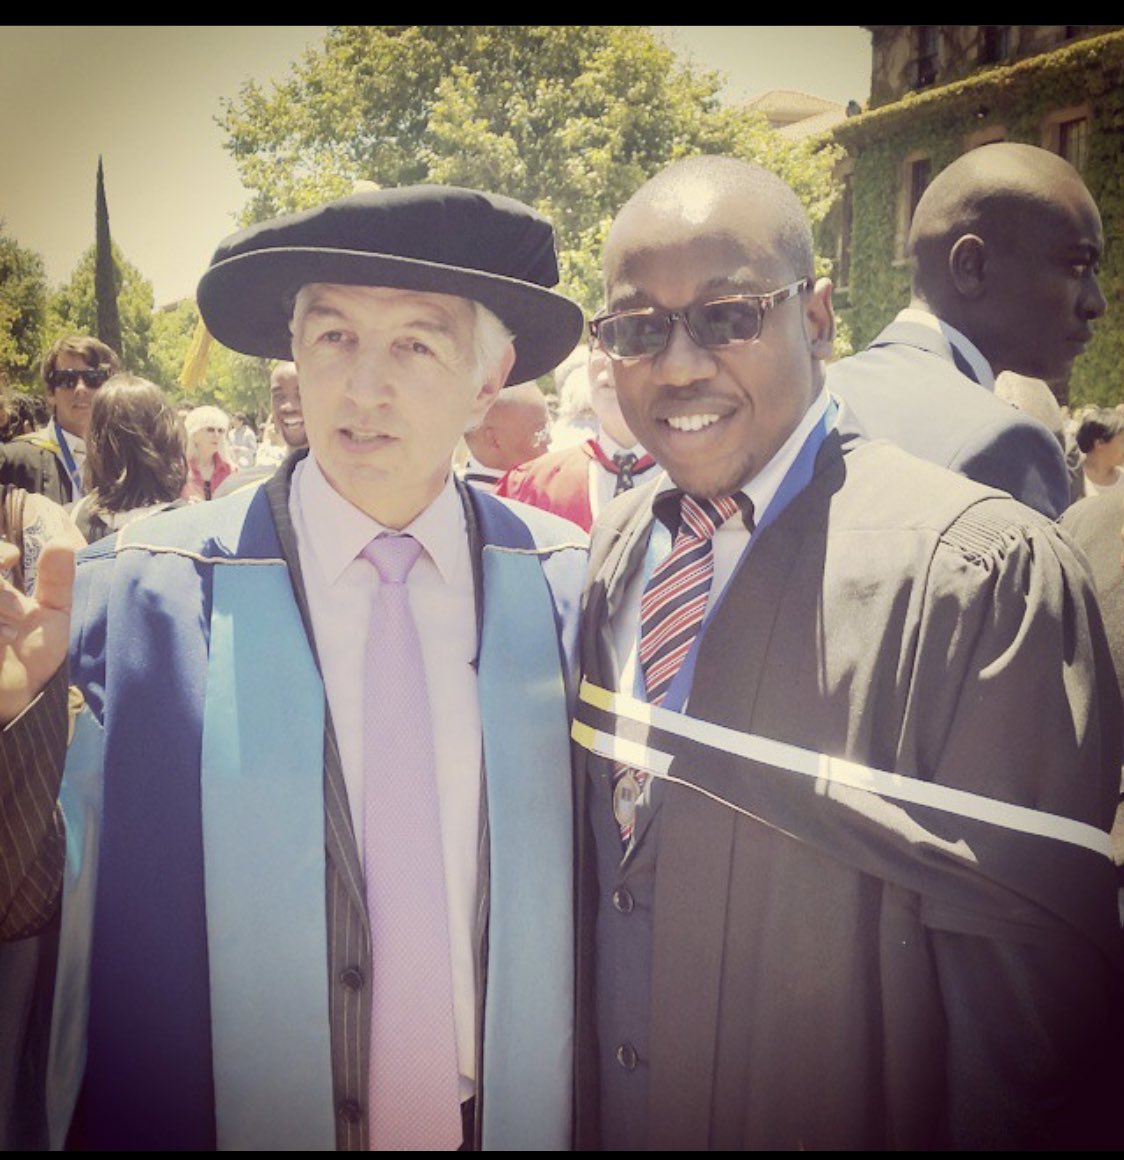 At the end of the year, after a lot of perserverence and prayer, we made it through and graduated. And also had the grades to take me into CTA.It wasn’t easy, but it’s certainly doable! Shout out to ex Vice Chancellor Max Price.